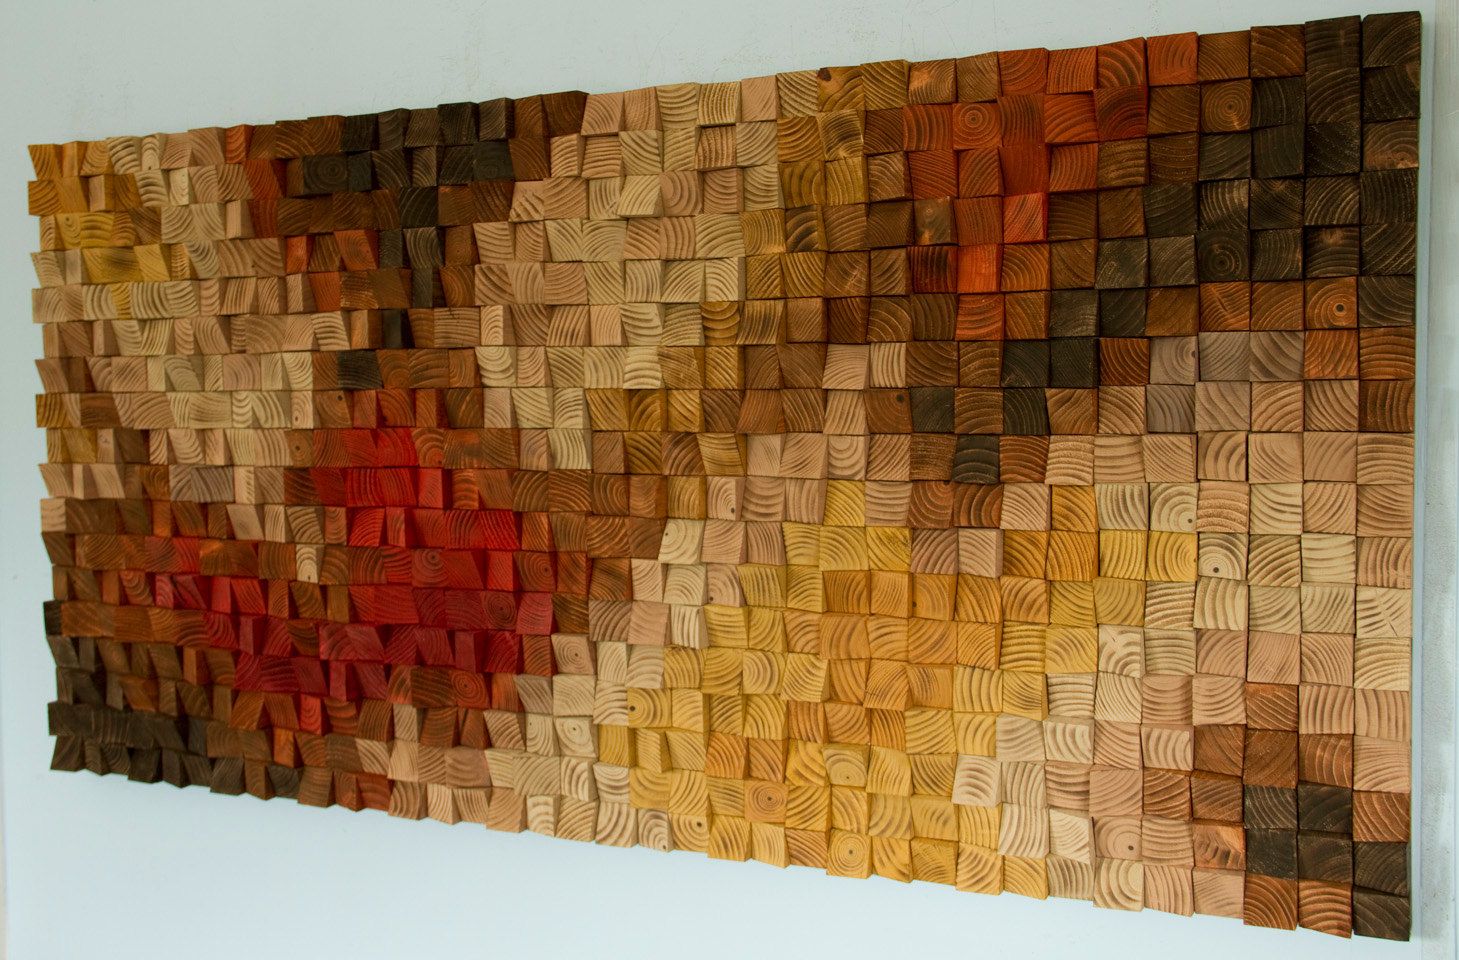 Large Rustic Wood Wall Art, Wood Wall Sculpture, Abstract Within Abstract Wood Wall Art (View 8 of 15)